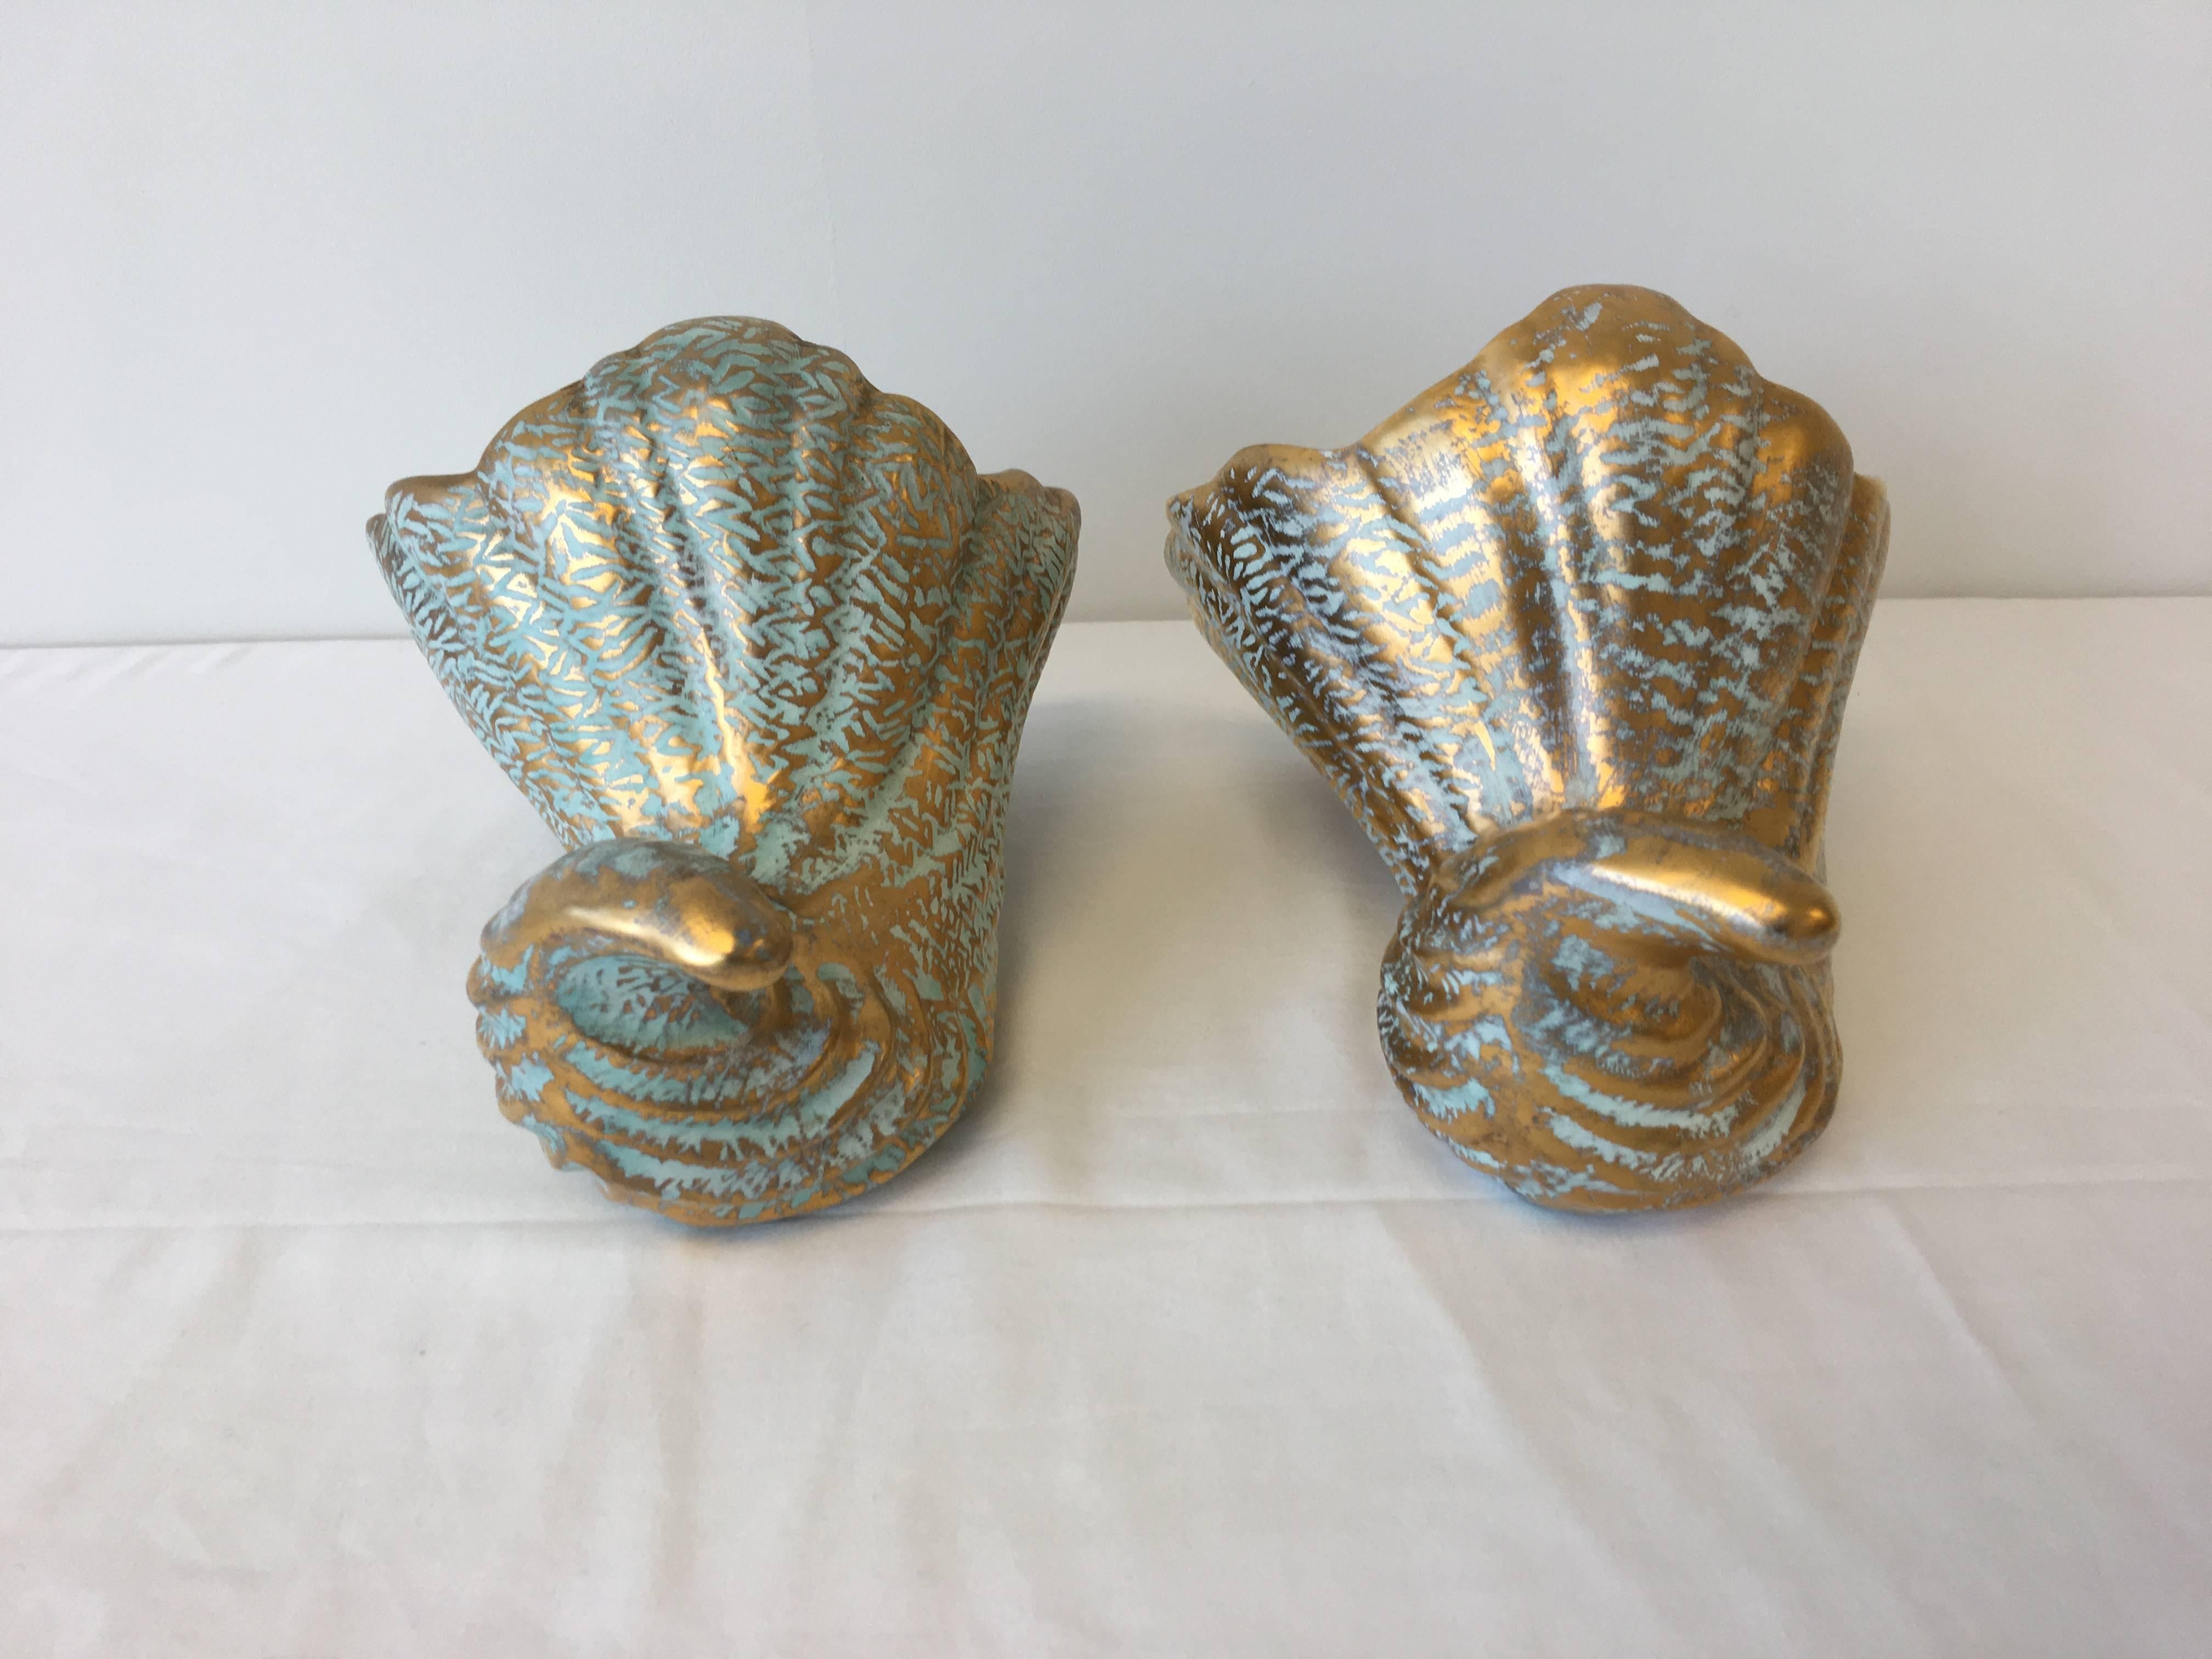 Painted 1970s Stangl Gold and Turquoise Cornucopia Serving Pieces, Pair